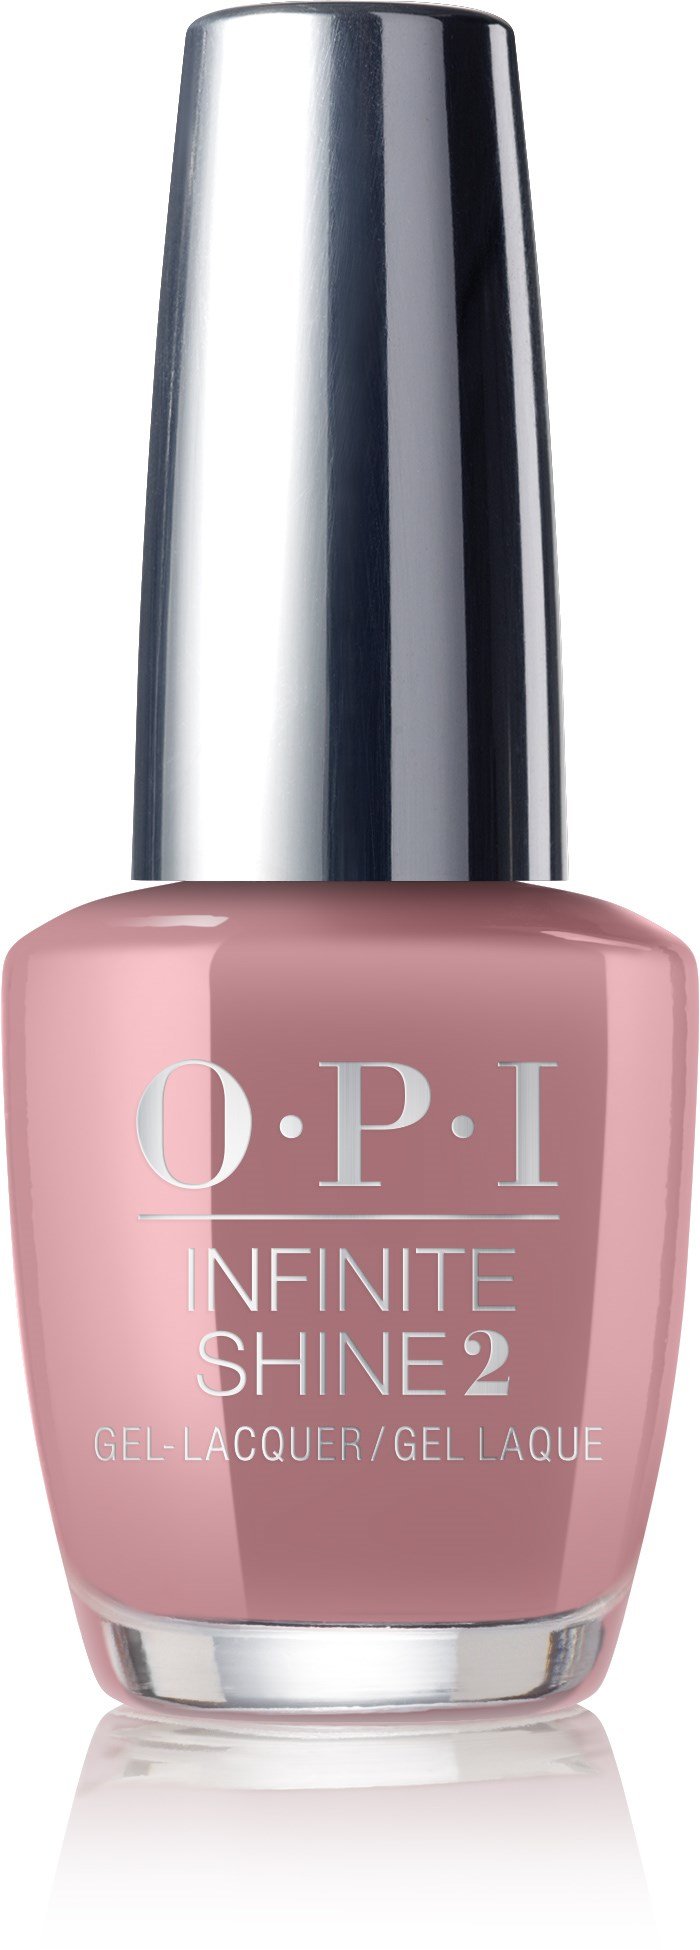 OPI Infinite Shine - Tickle my France-y